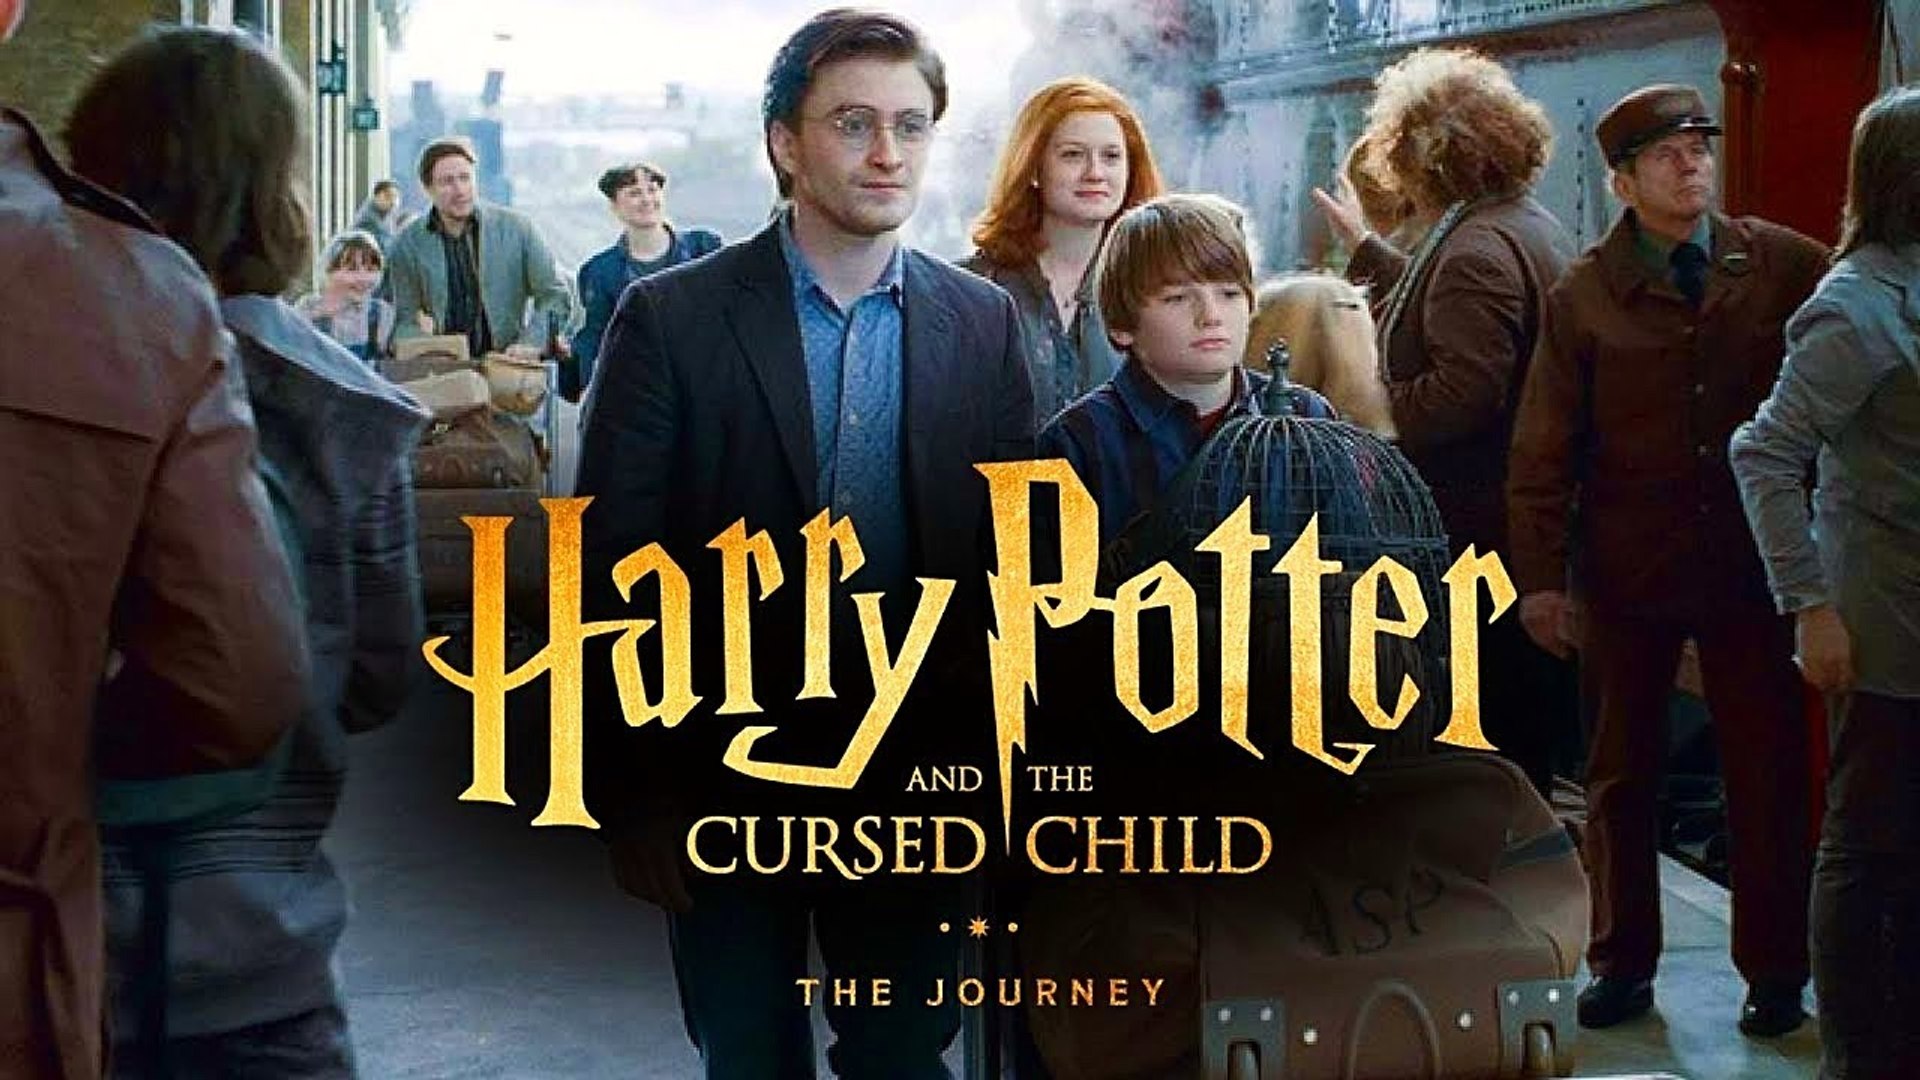 Harry Potter 9: The Cursed Child Movie Planned at Warner Bros.